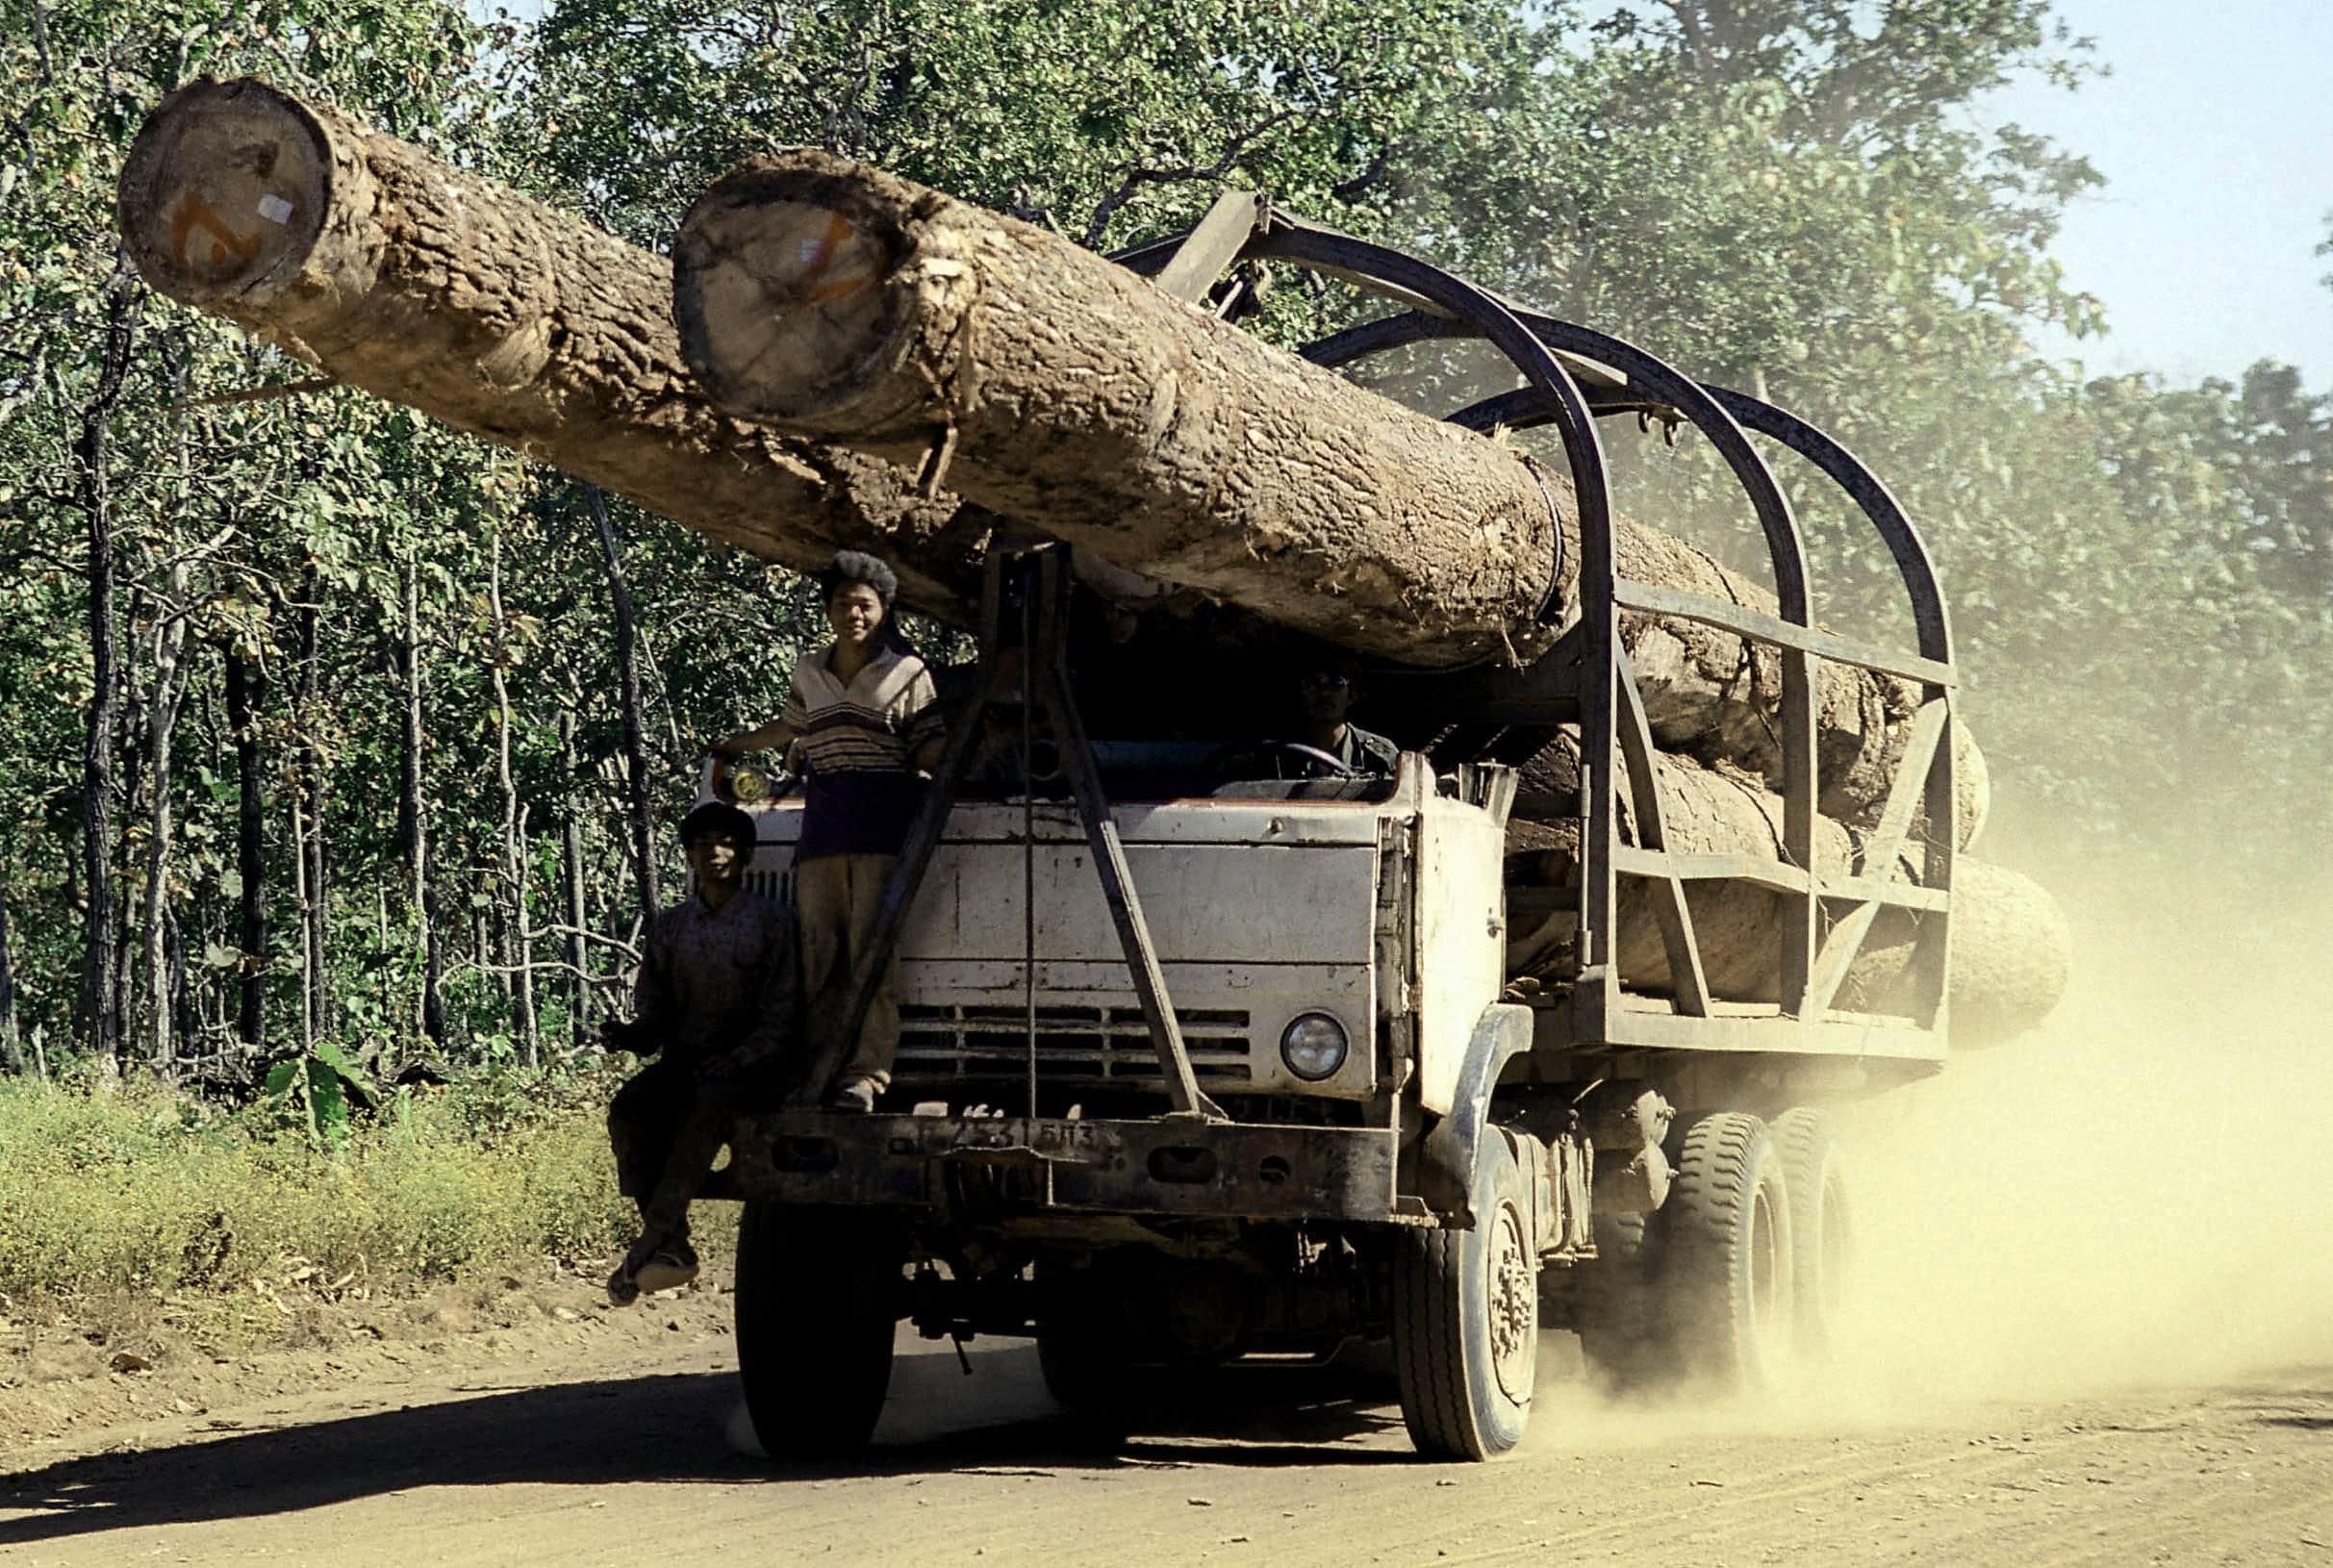 A truck carries logs on a rural road in Preah Vihear province, AP Photo /Heng Sinith